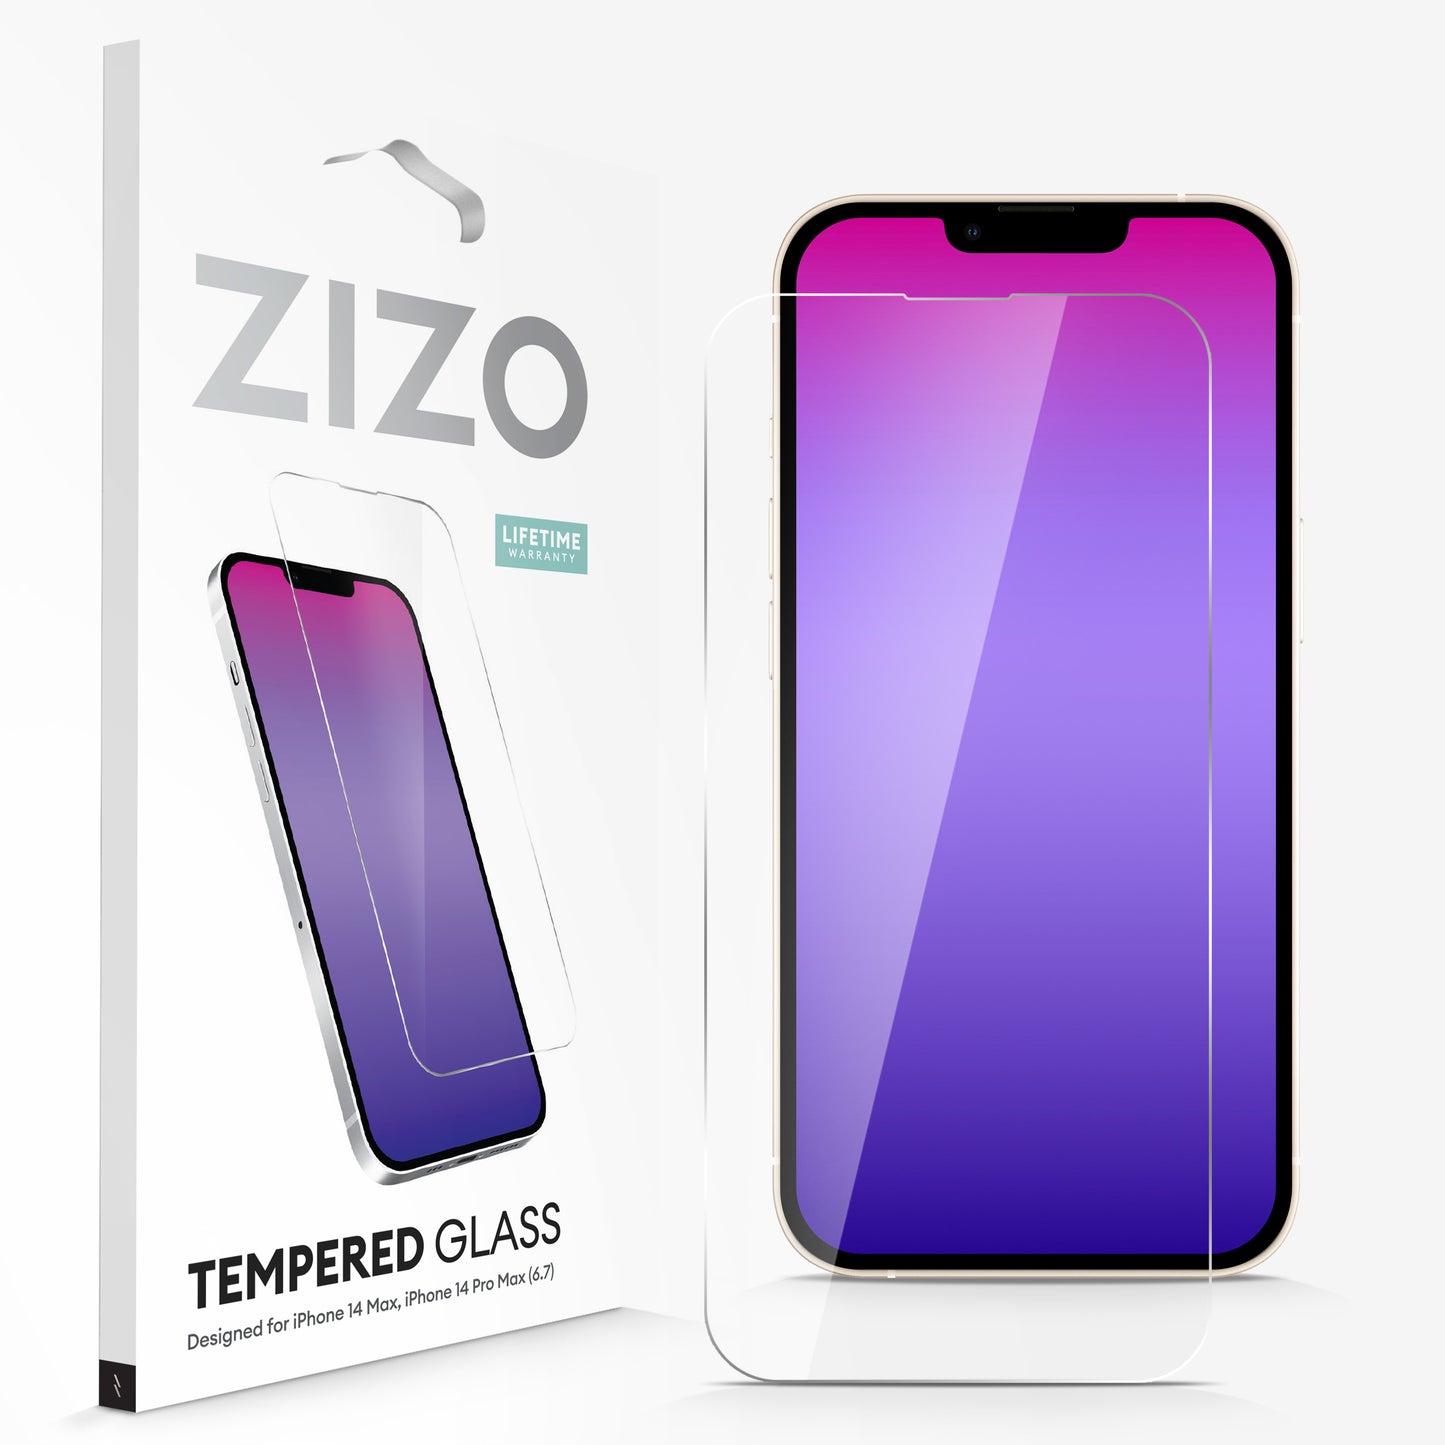 ZIZO TEMPERED GLASS Screen Protector for iPhone 14 Max (6.7)